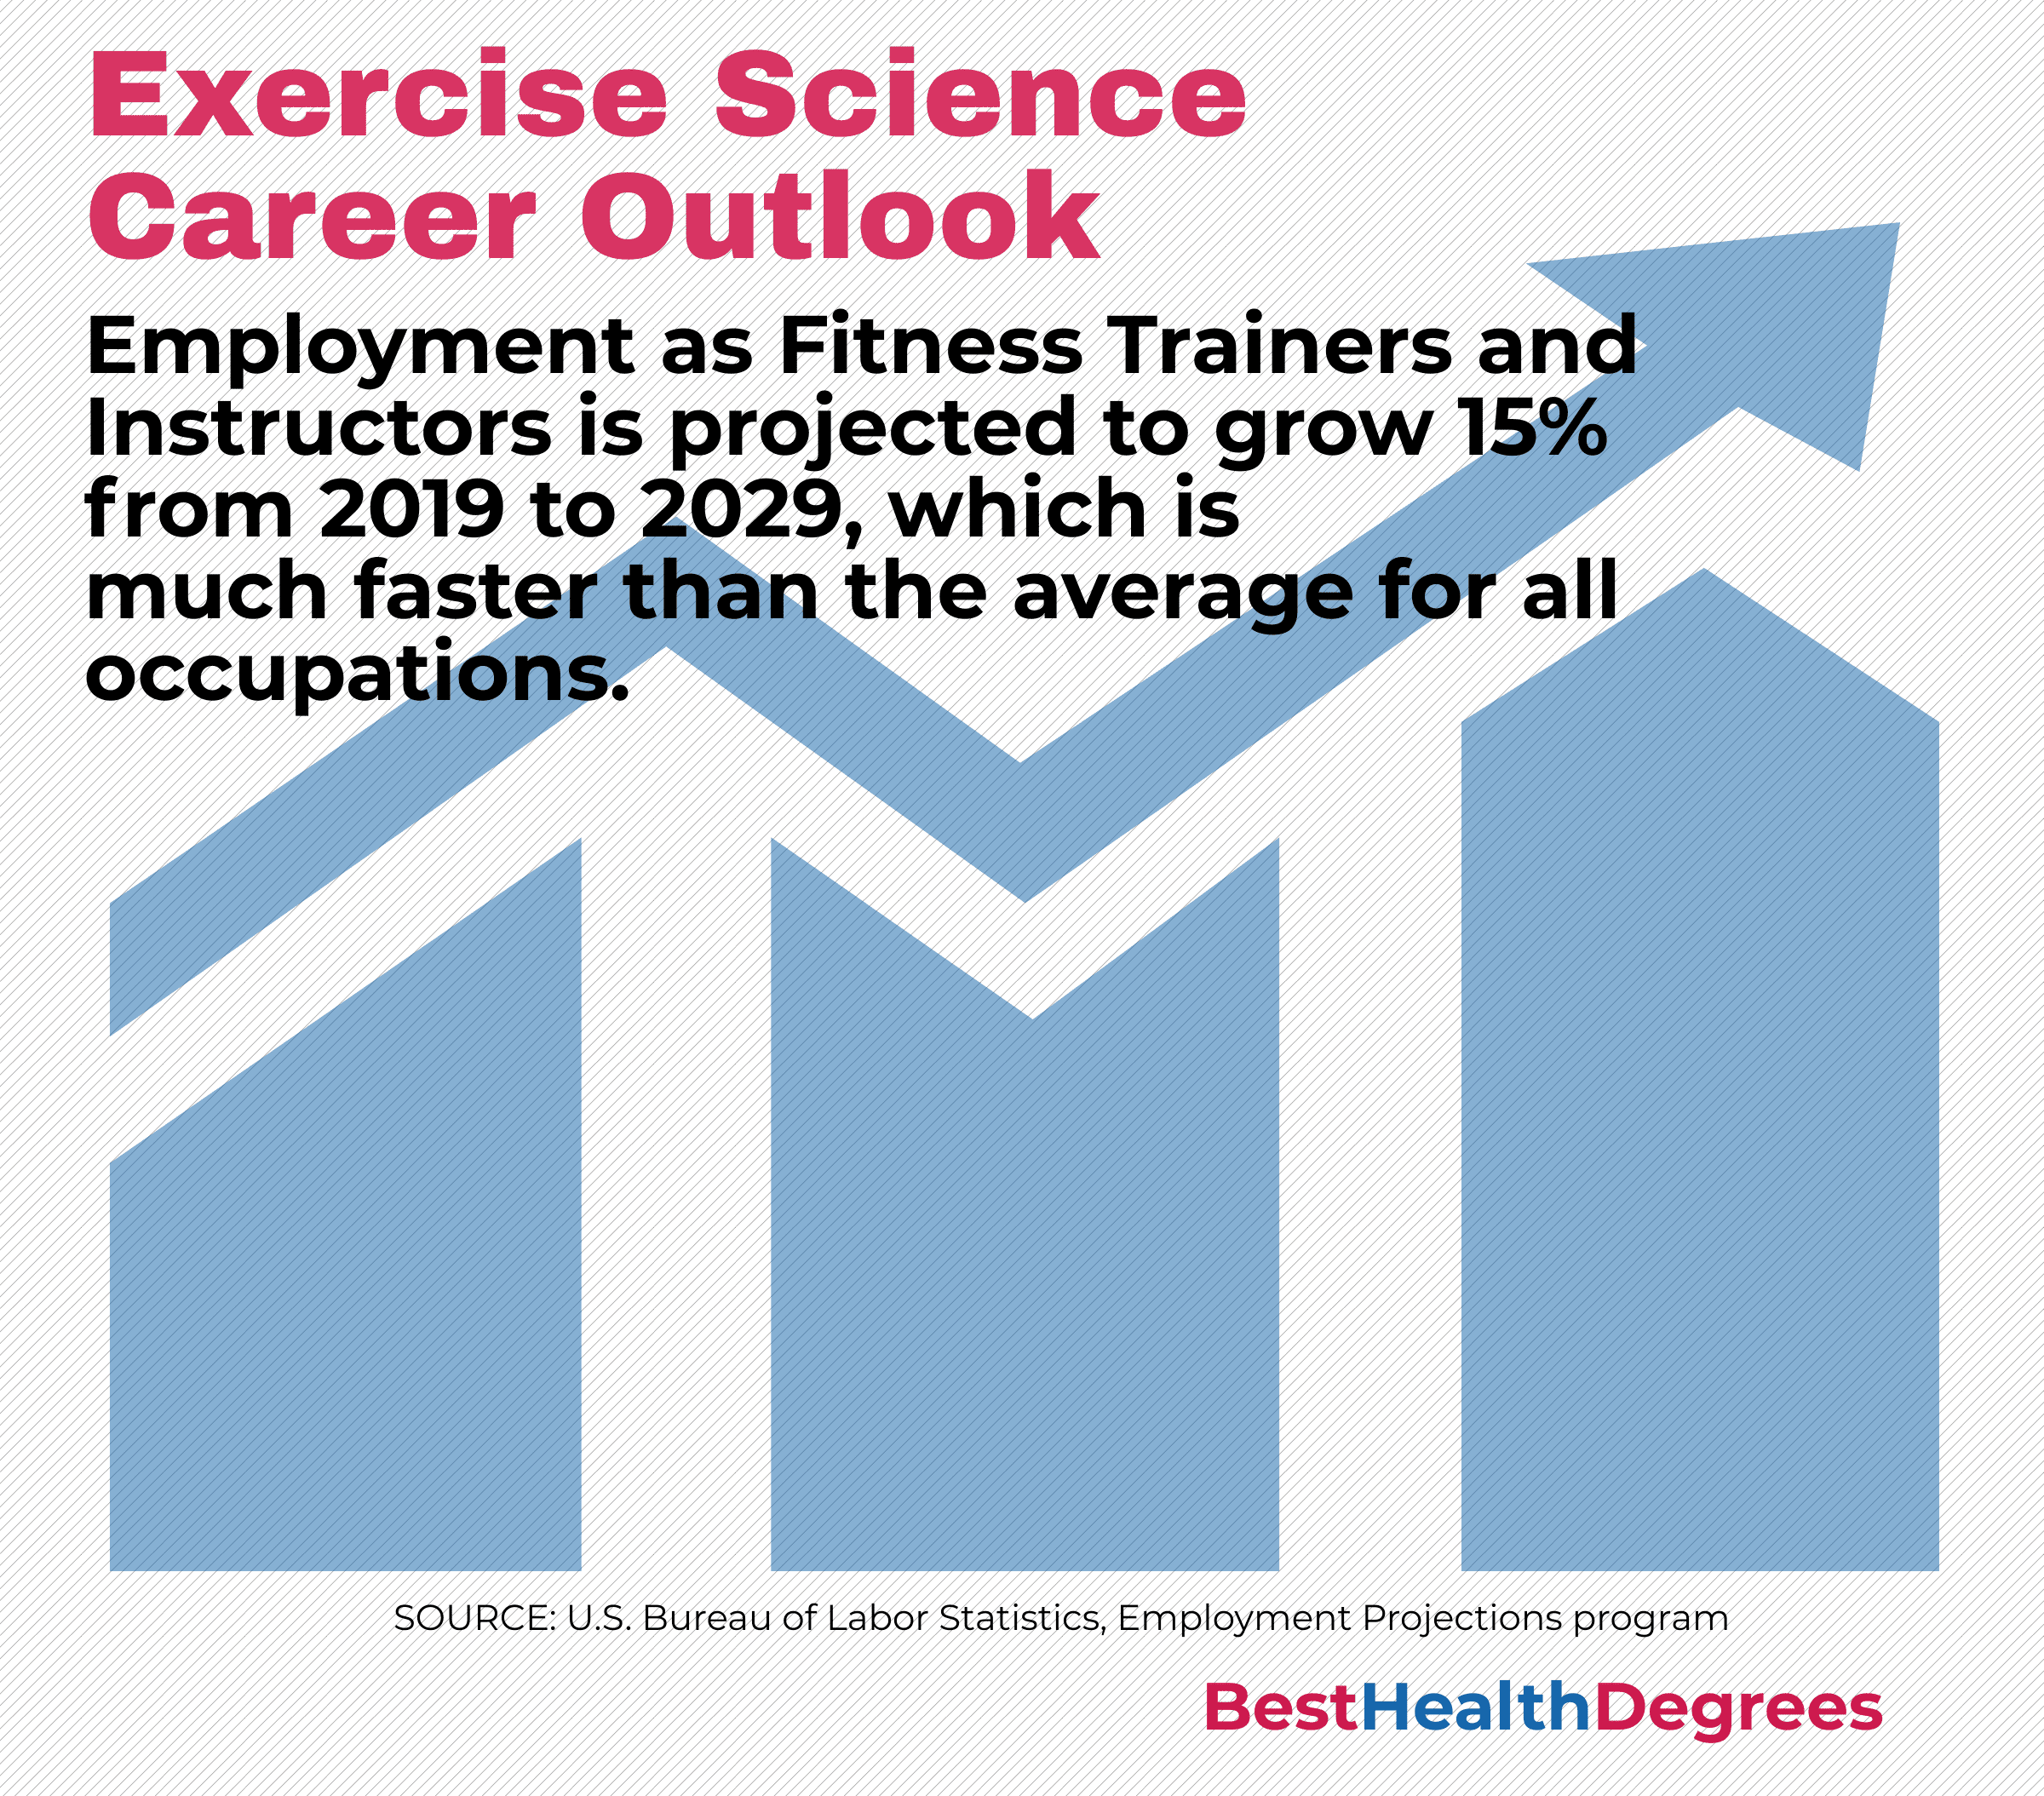 What are Kinesiology and Exercise Science Jobs? - The Best Health